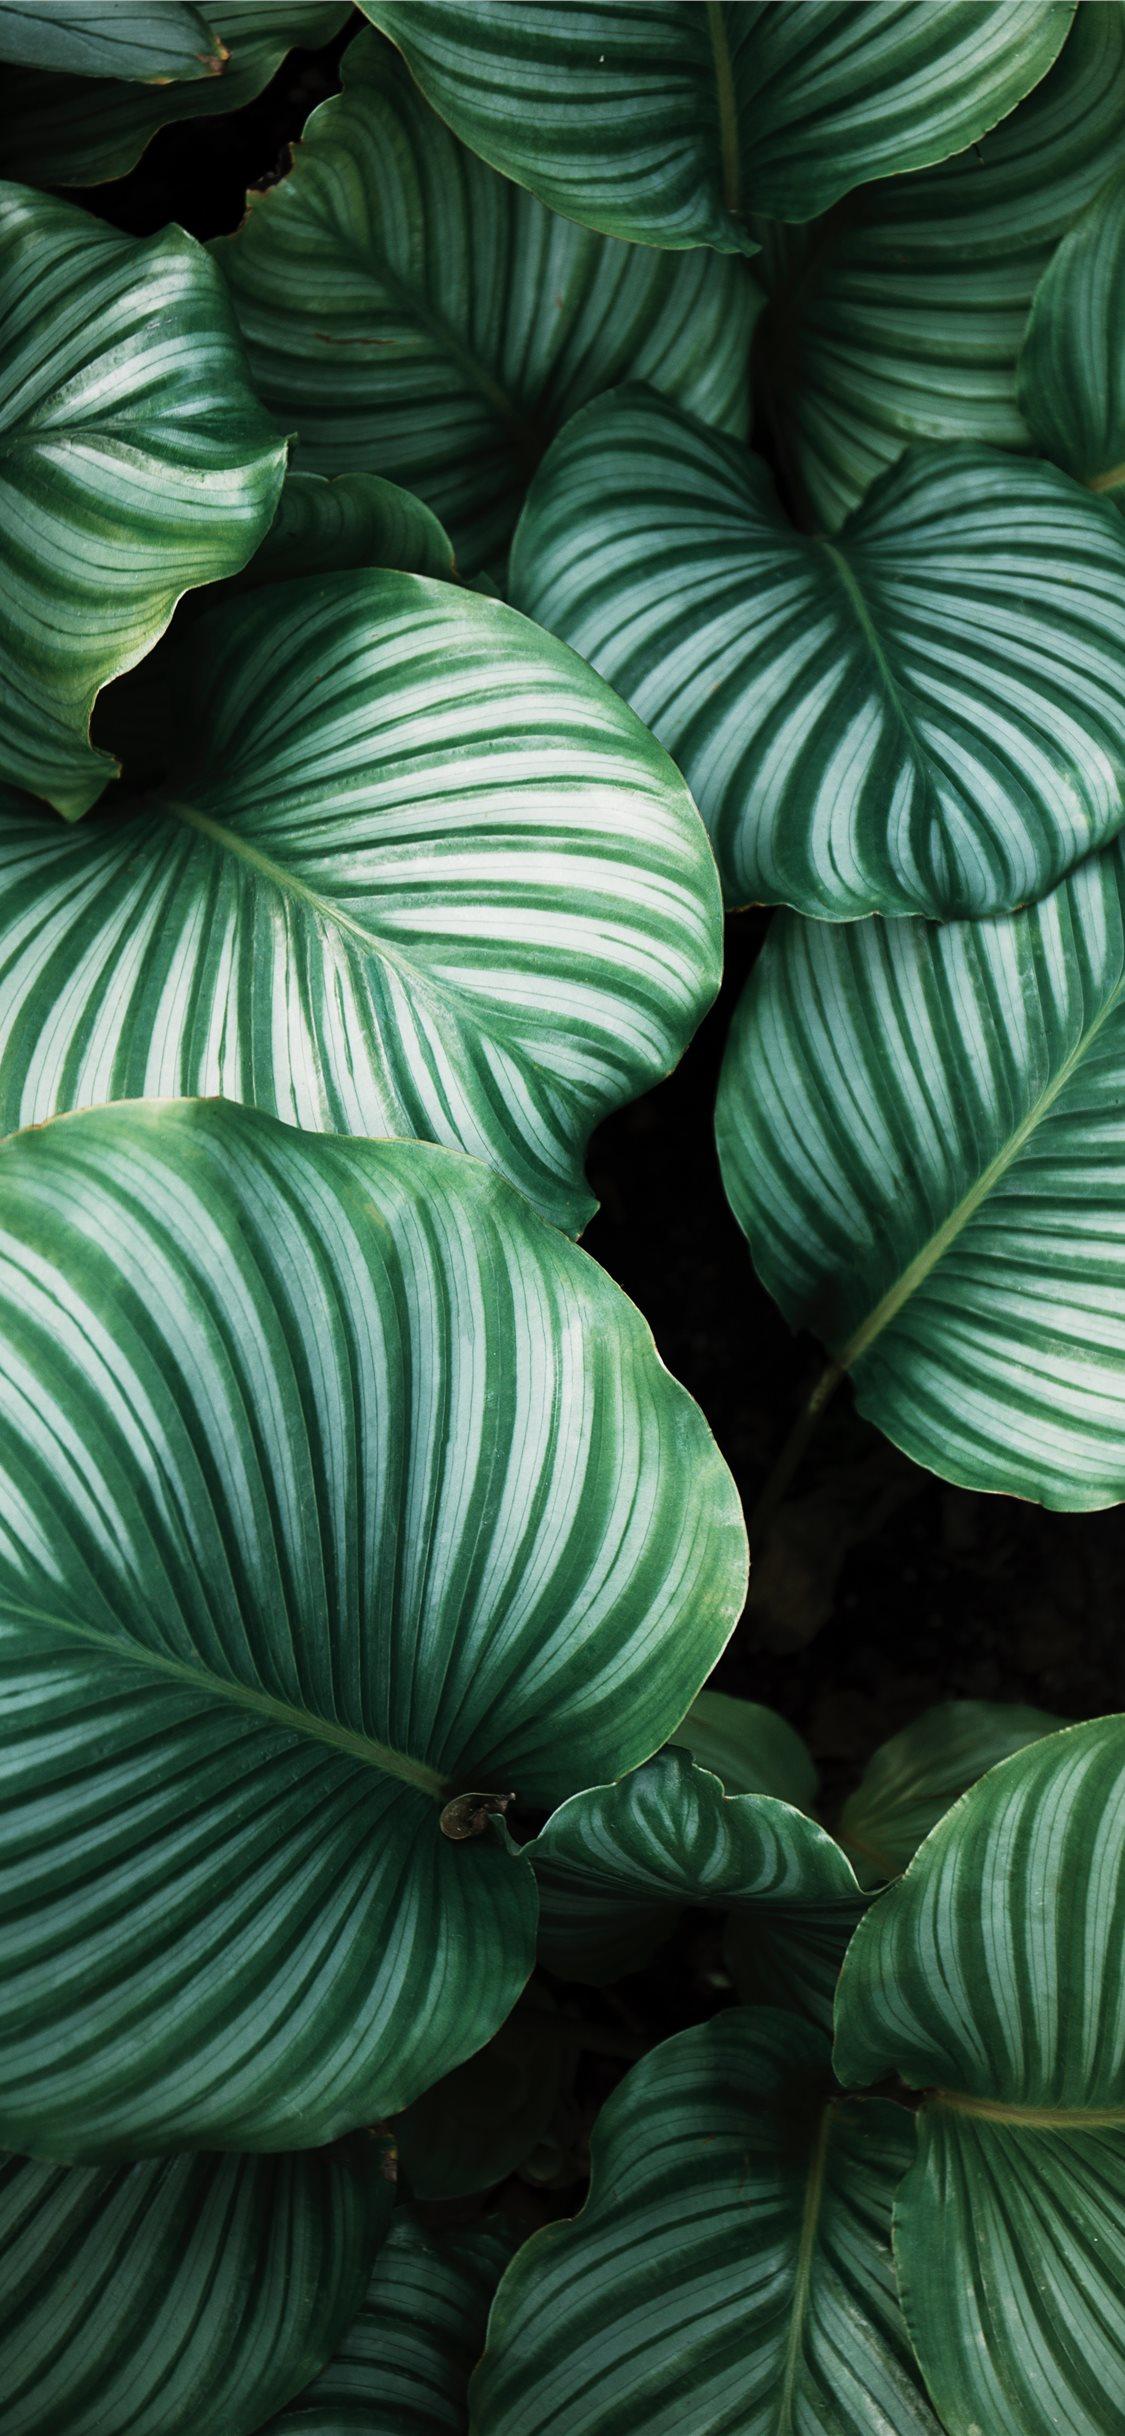 green and white leafed plants iPhone X Wallpaper Free Download